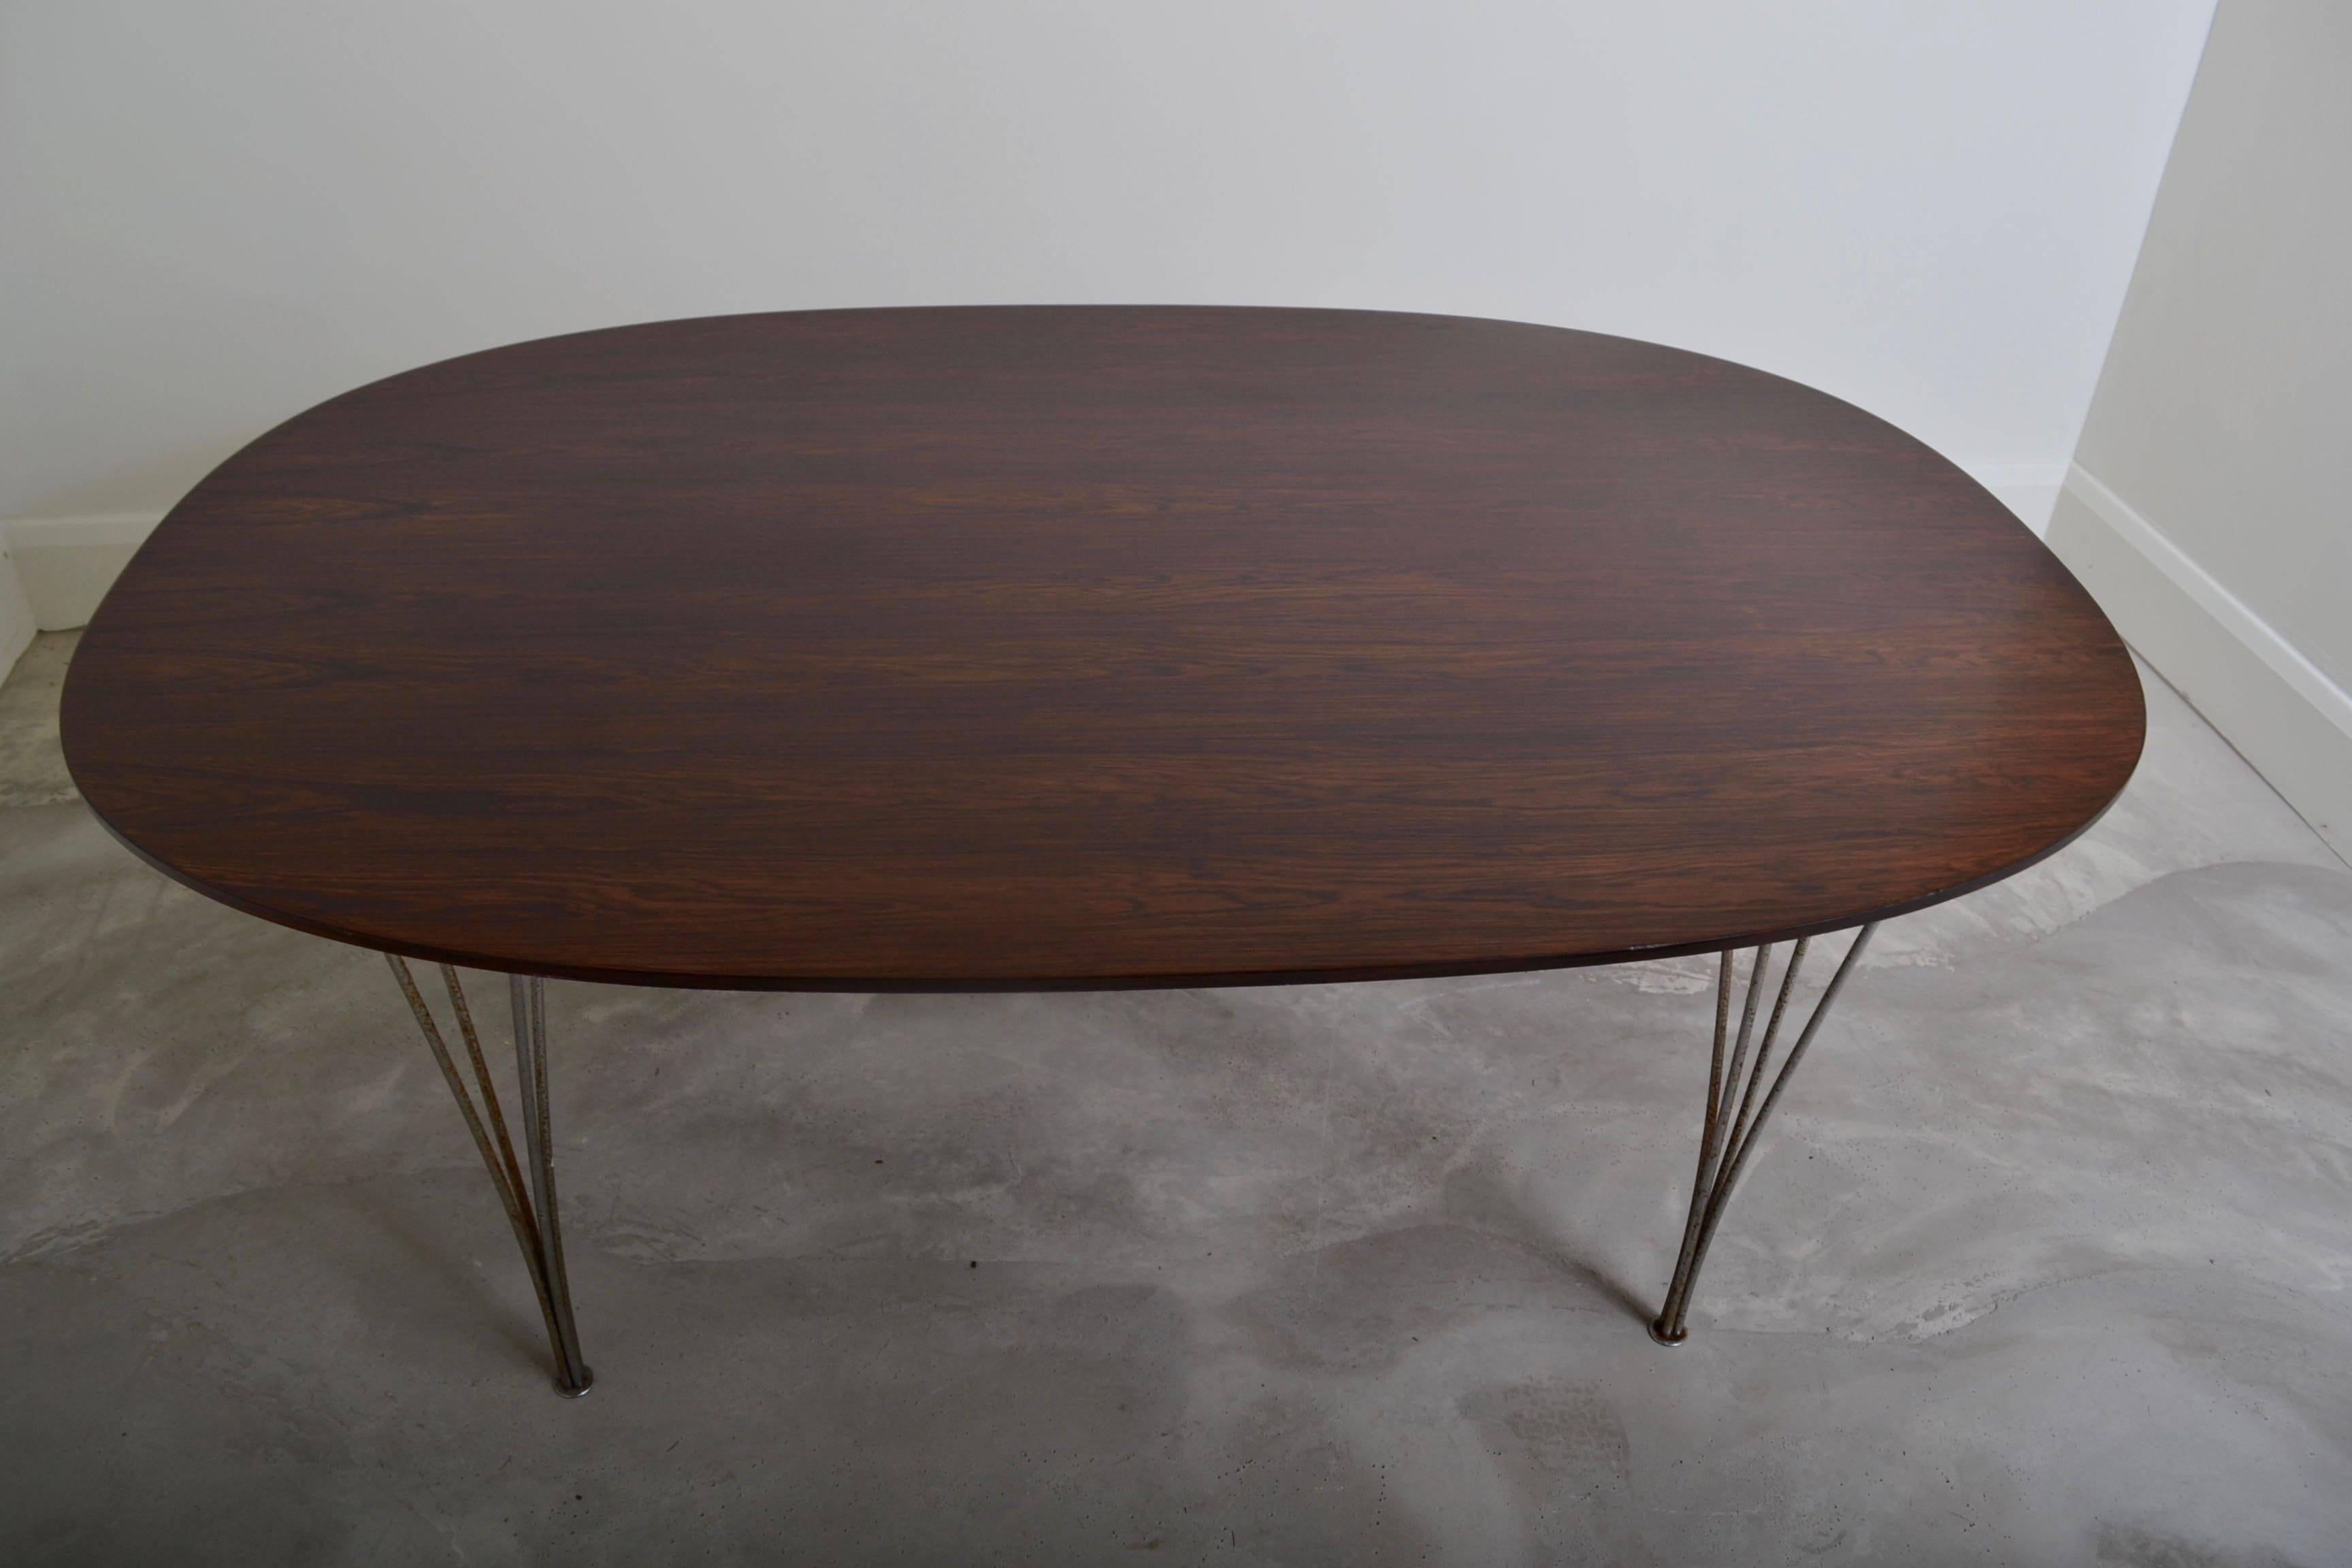 Super Ellipse Dining Table by Piet Hein and Bruno Mathsson, Denmark 1974 In Good Condition For Sale In Wargrave, Berkshire